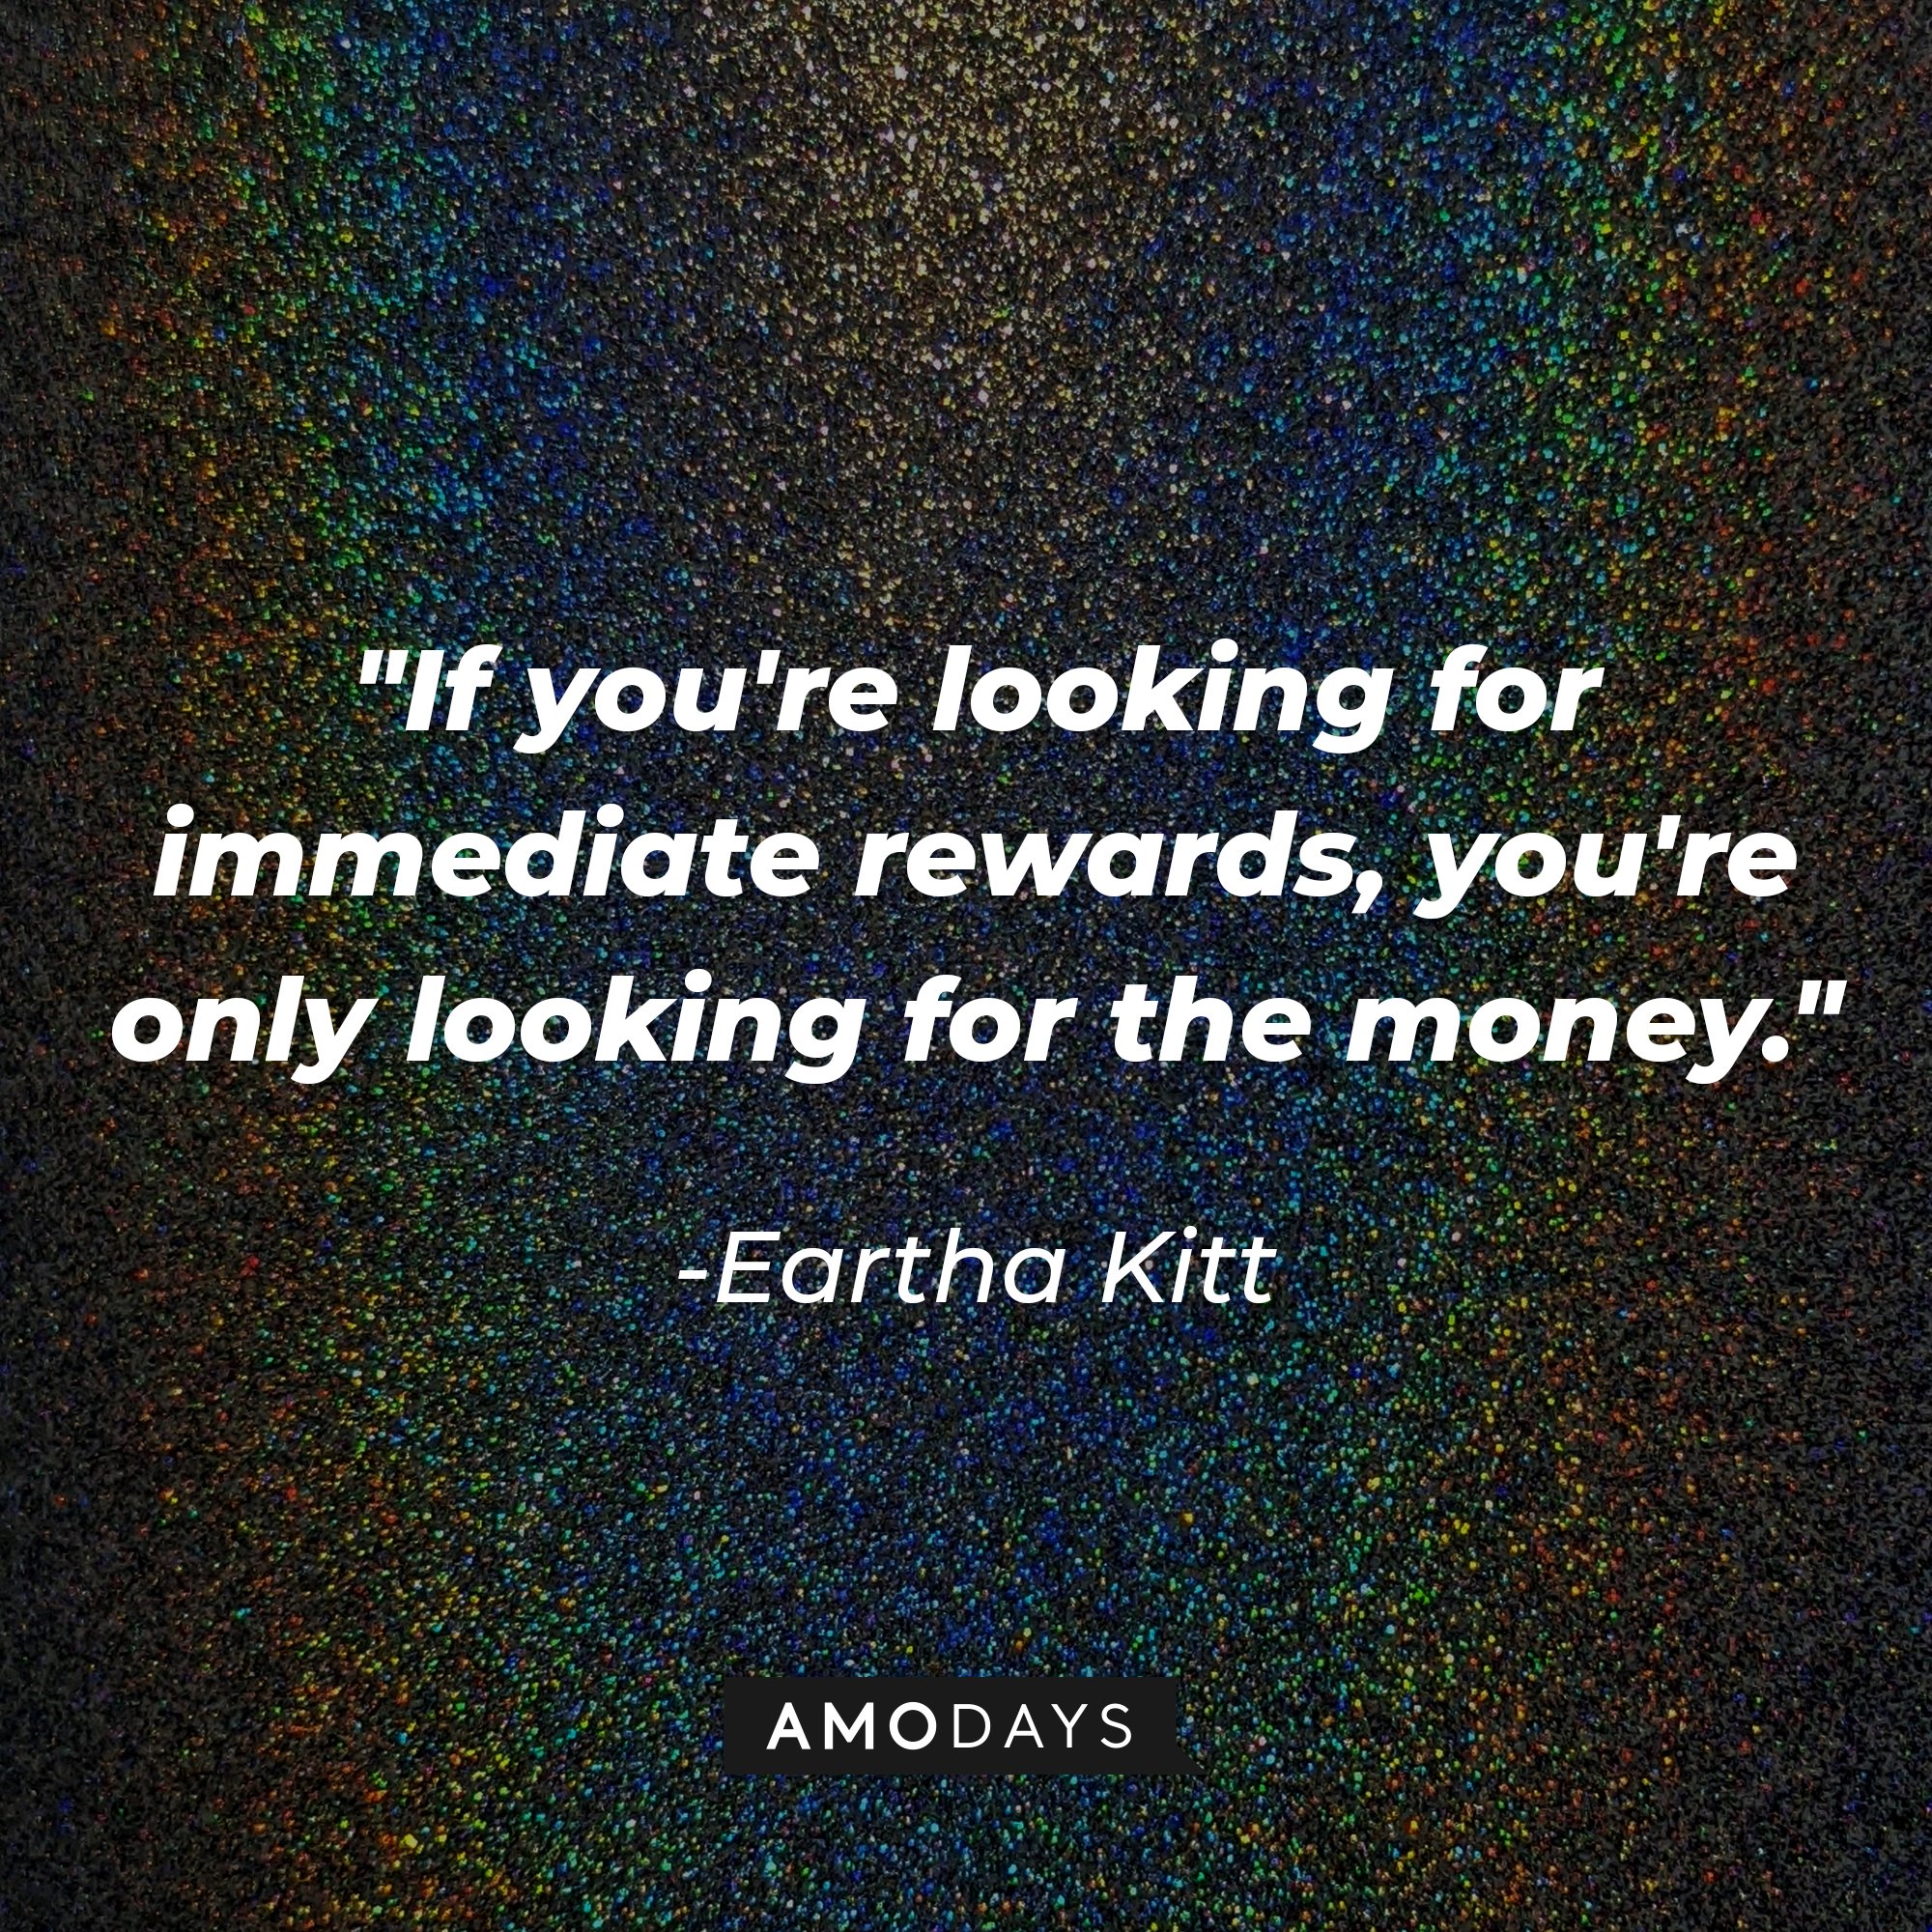 Eartha Kitt’s quote: "If you're looking for immediate rewards, you're only looking for the money." | Image: AmoDays